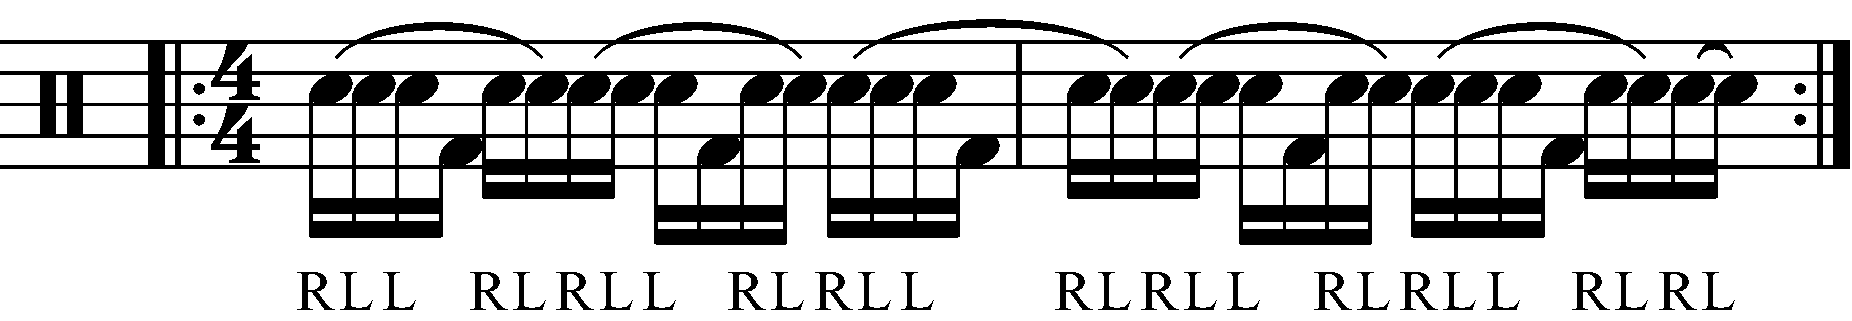 A syncopated two bar R L L F R L in 4/4